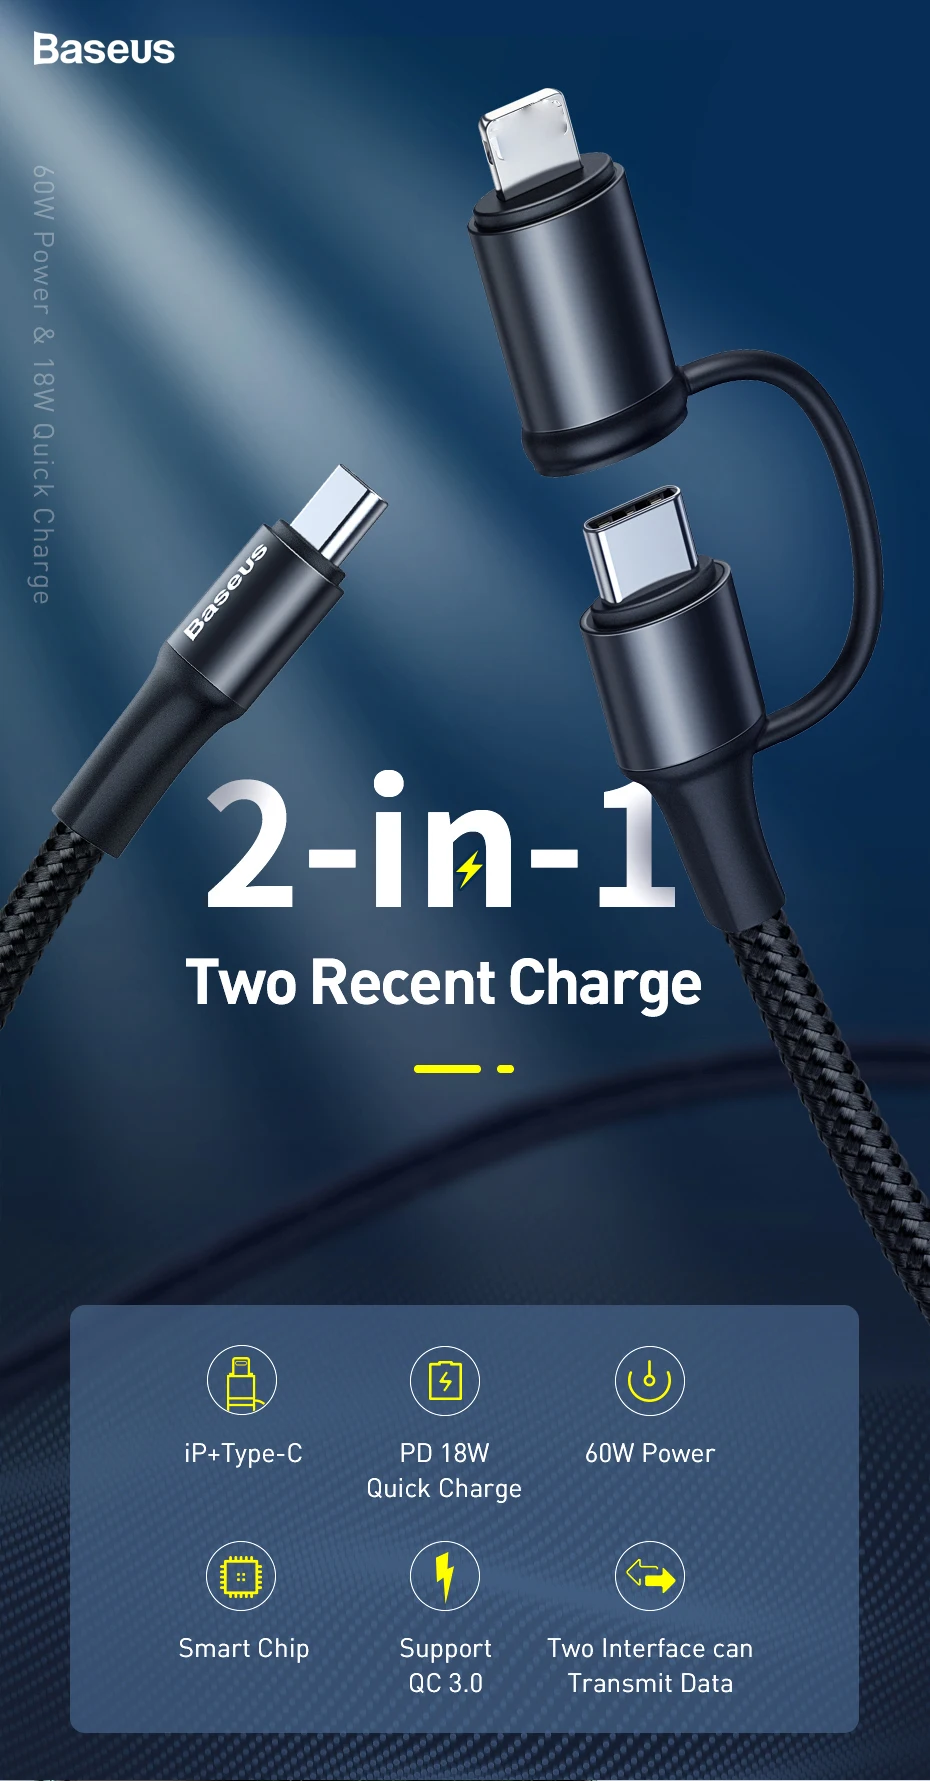 Baseus 2in1 60W Type C USB Cable Quick Charge Support Notebook Charger USB Cable Data Wire Transmission Fast Charging USB Cable|Mobile Phone Cables| - AliExpress